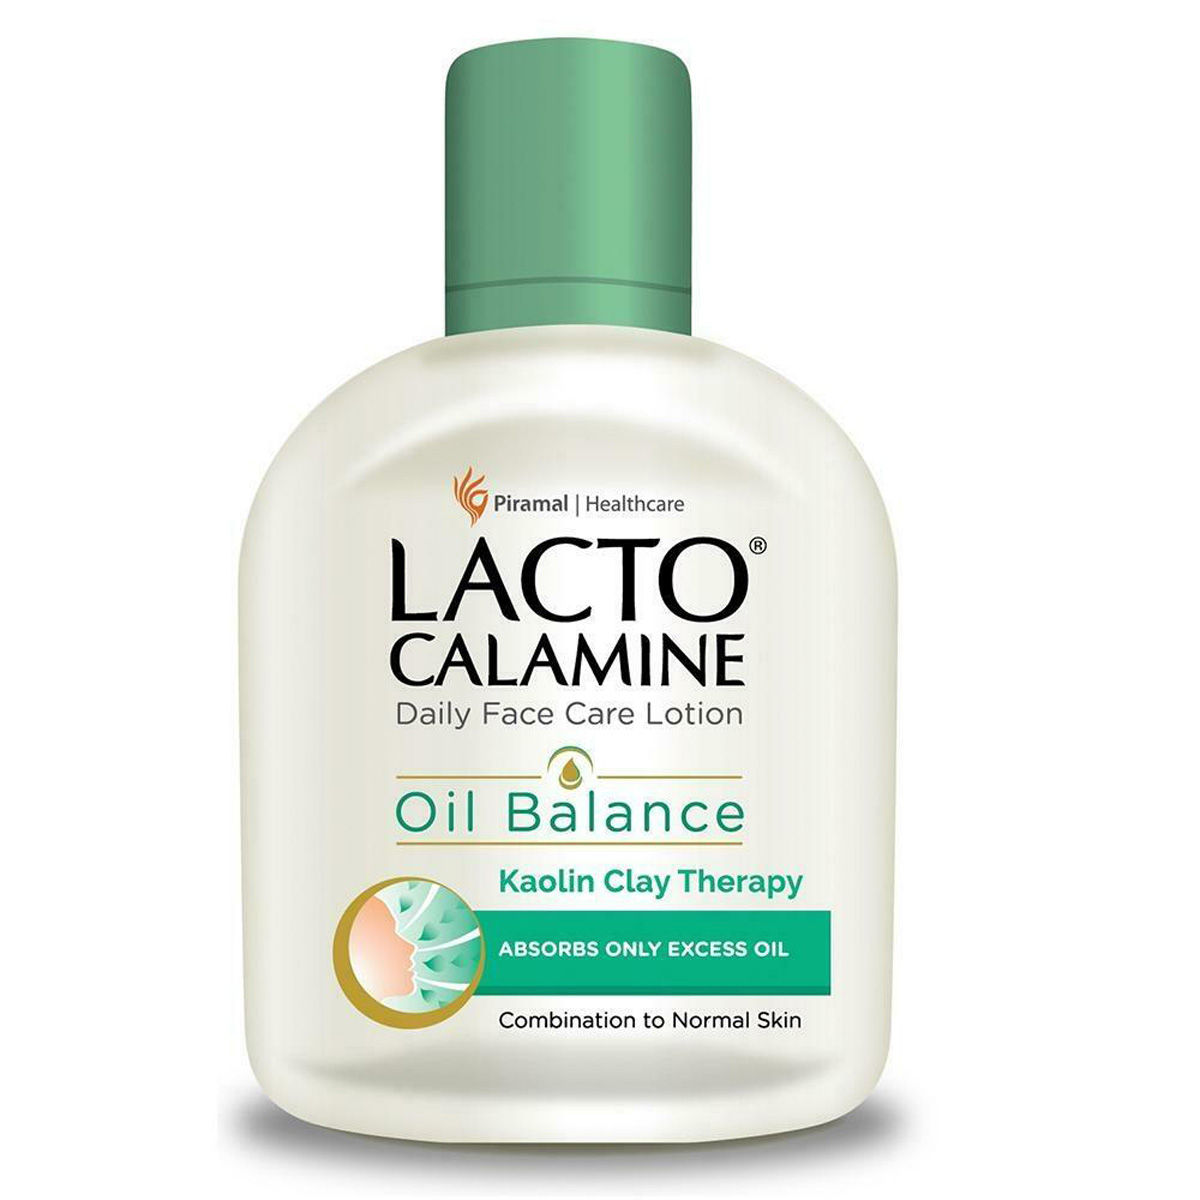 Lacto Calamine Oil Balance Daily Face Care Lotion For Combination To Normal Skin, 30 ml, Pack of 1 